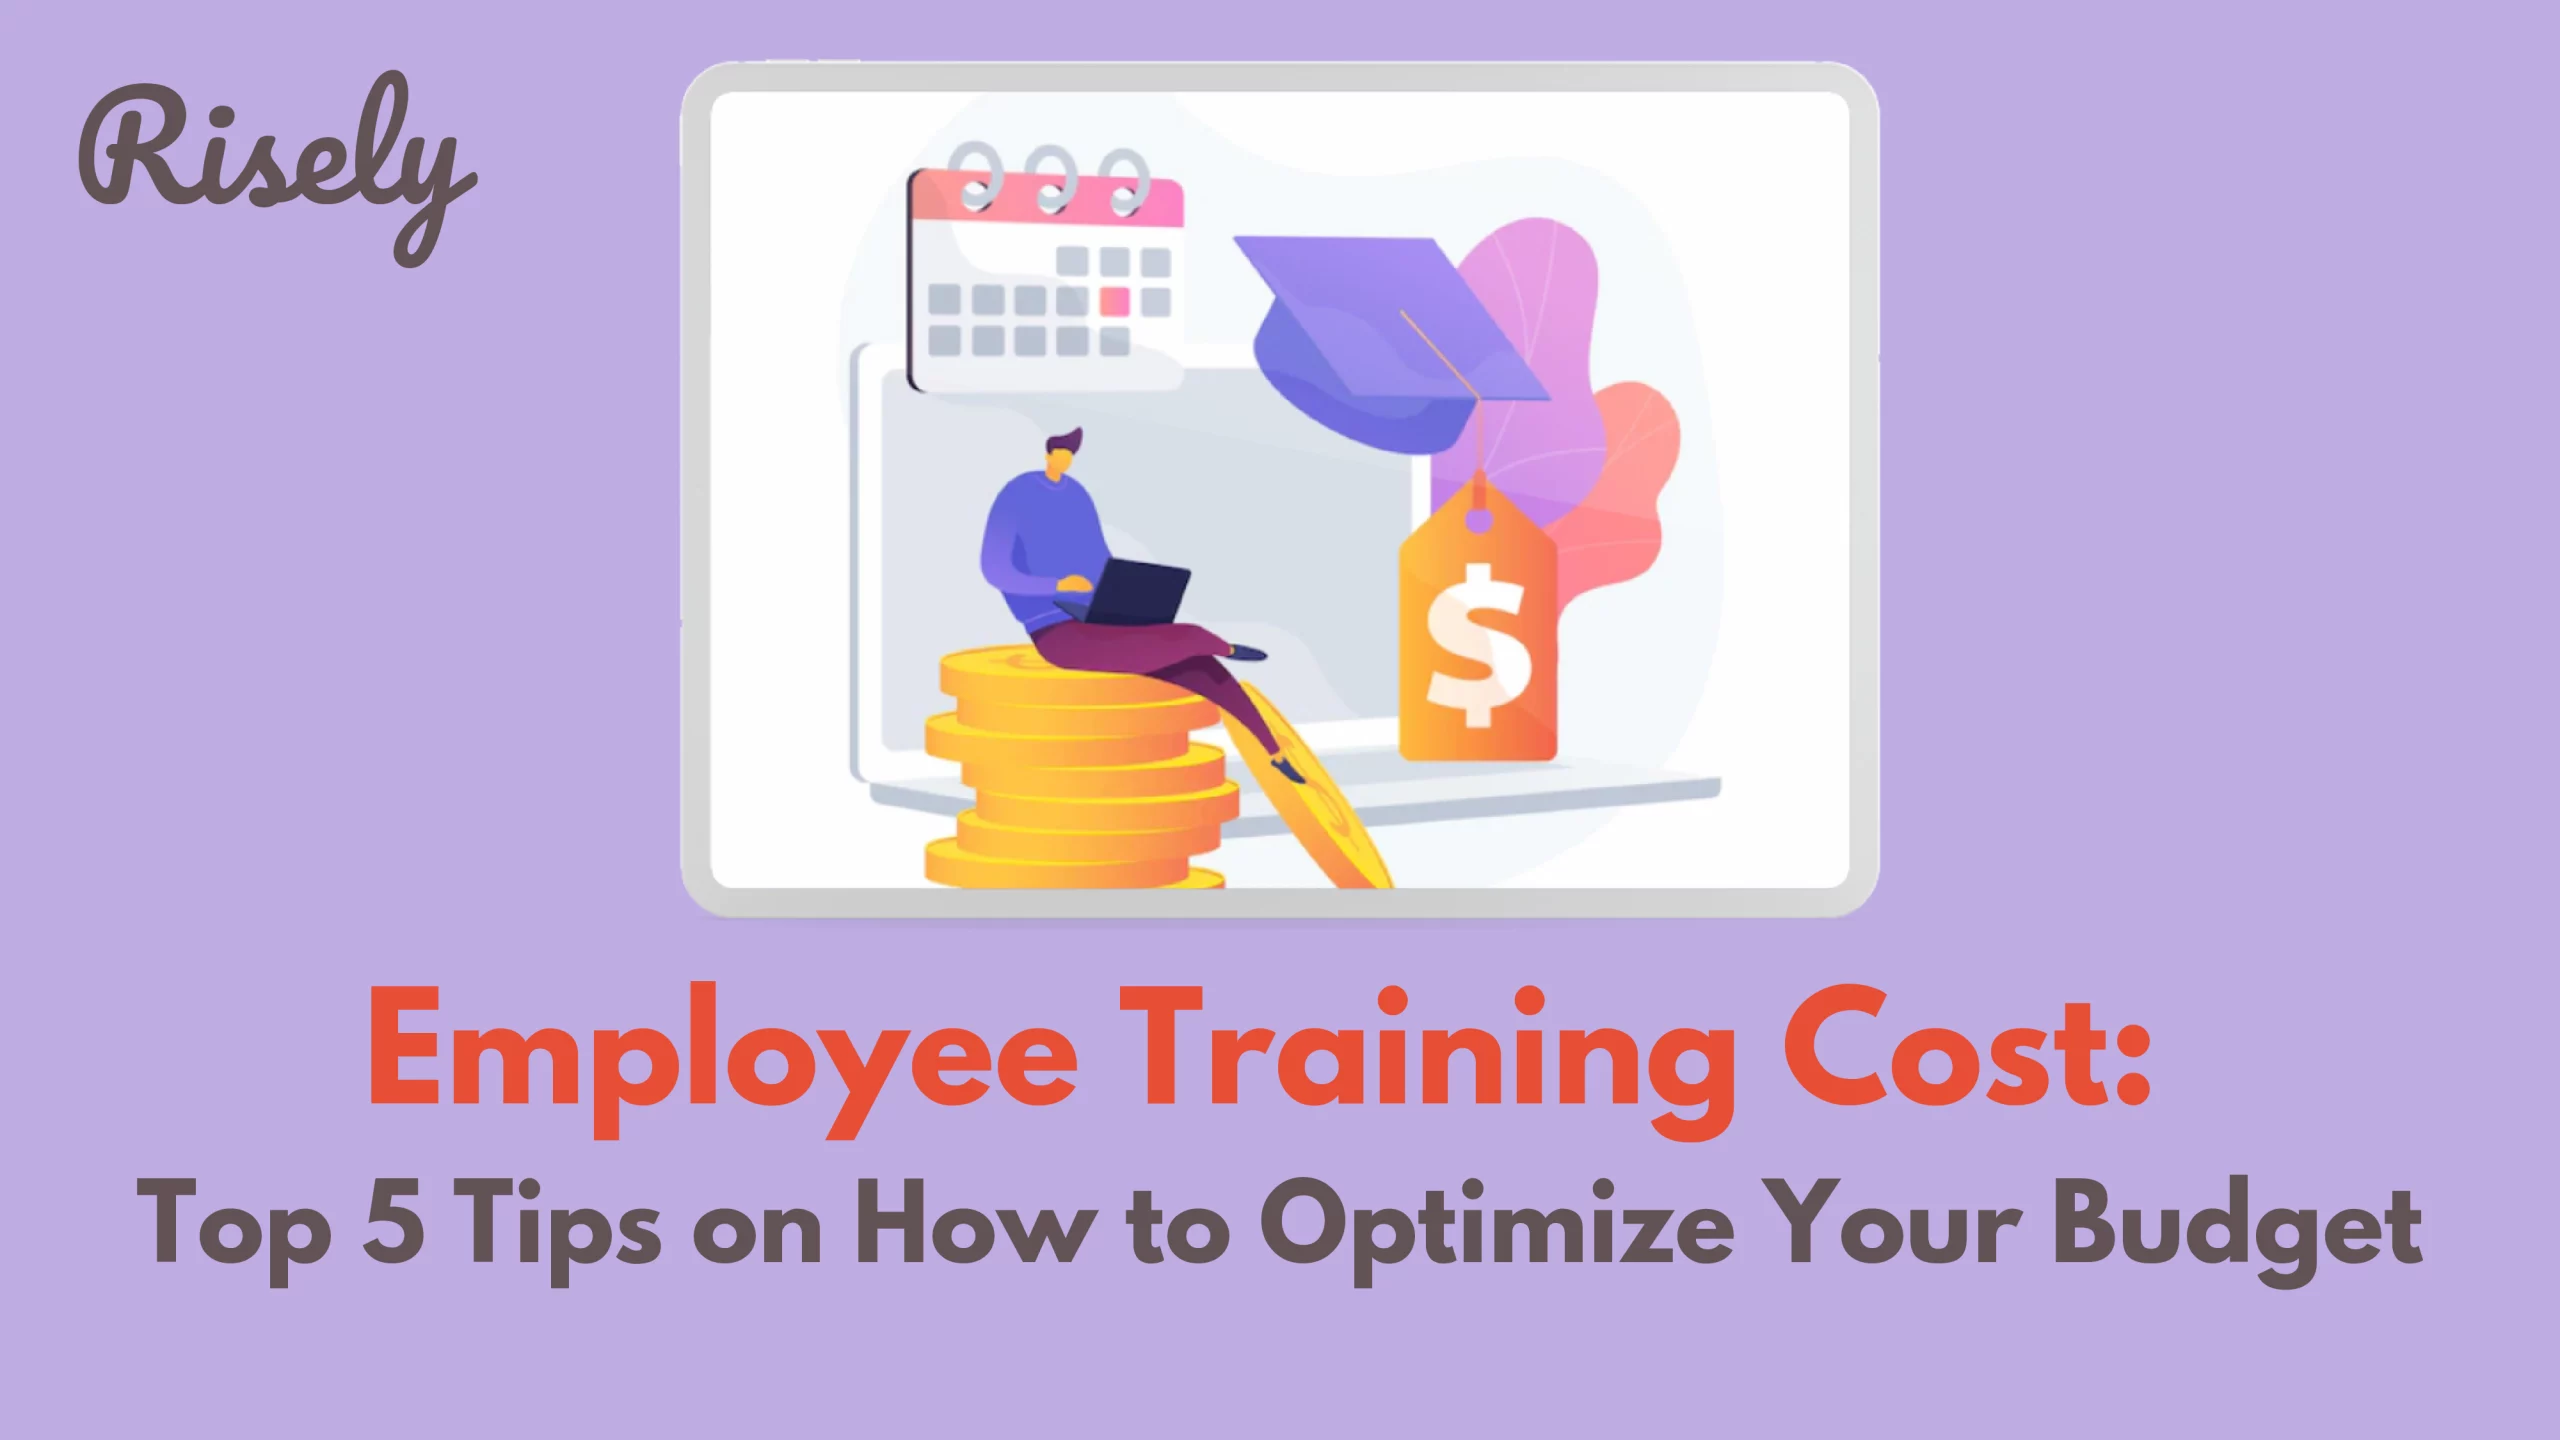 Employee Training Cost: Top 5 Tips on How to Optimize Your Budget